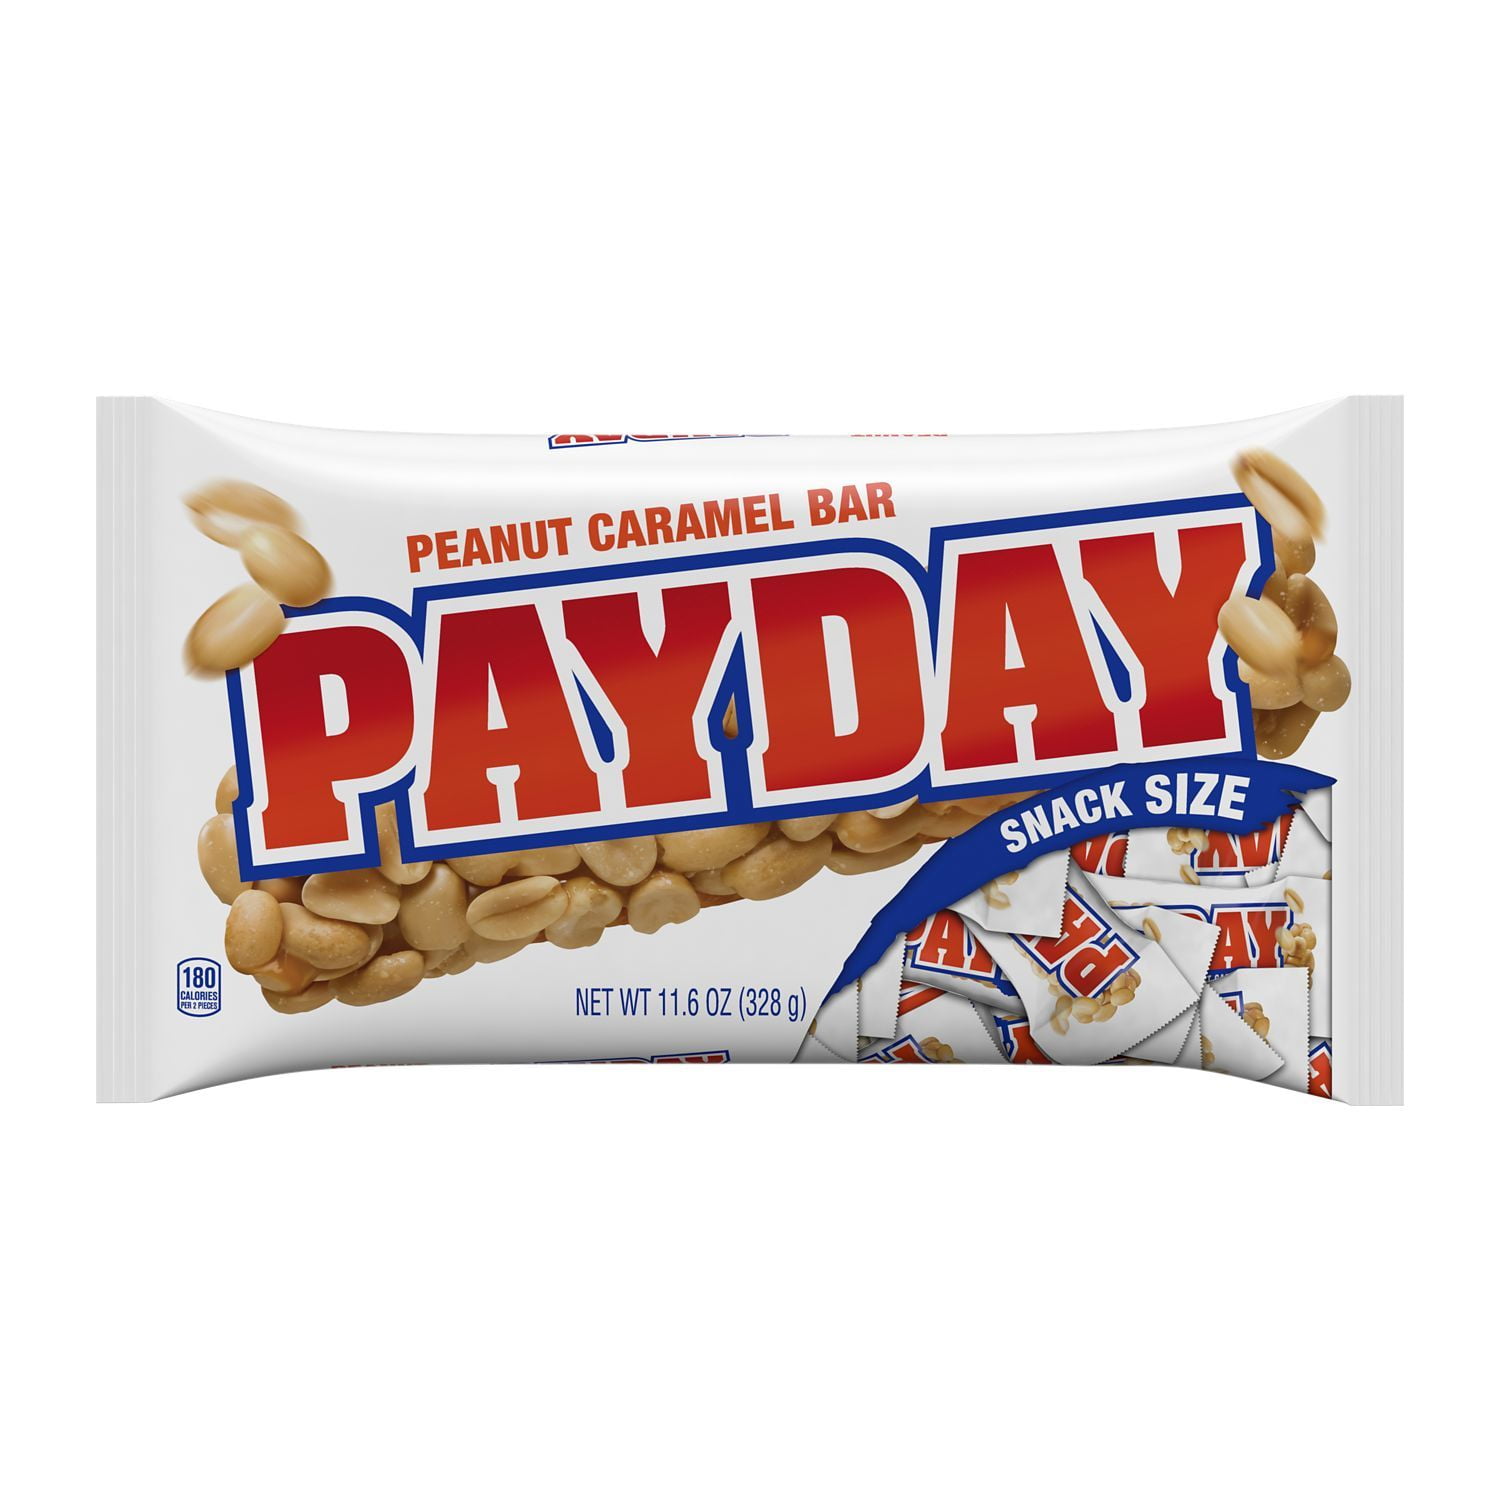 PAYDAY, Peanut Caramel Snack Size Candy Bars, Individually Wrapped, Gluten Free, 11.6 oz, Bag